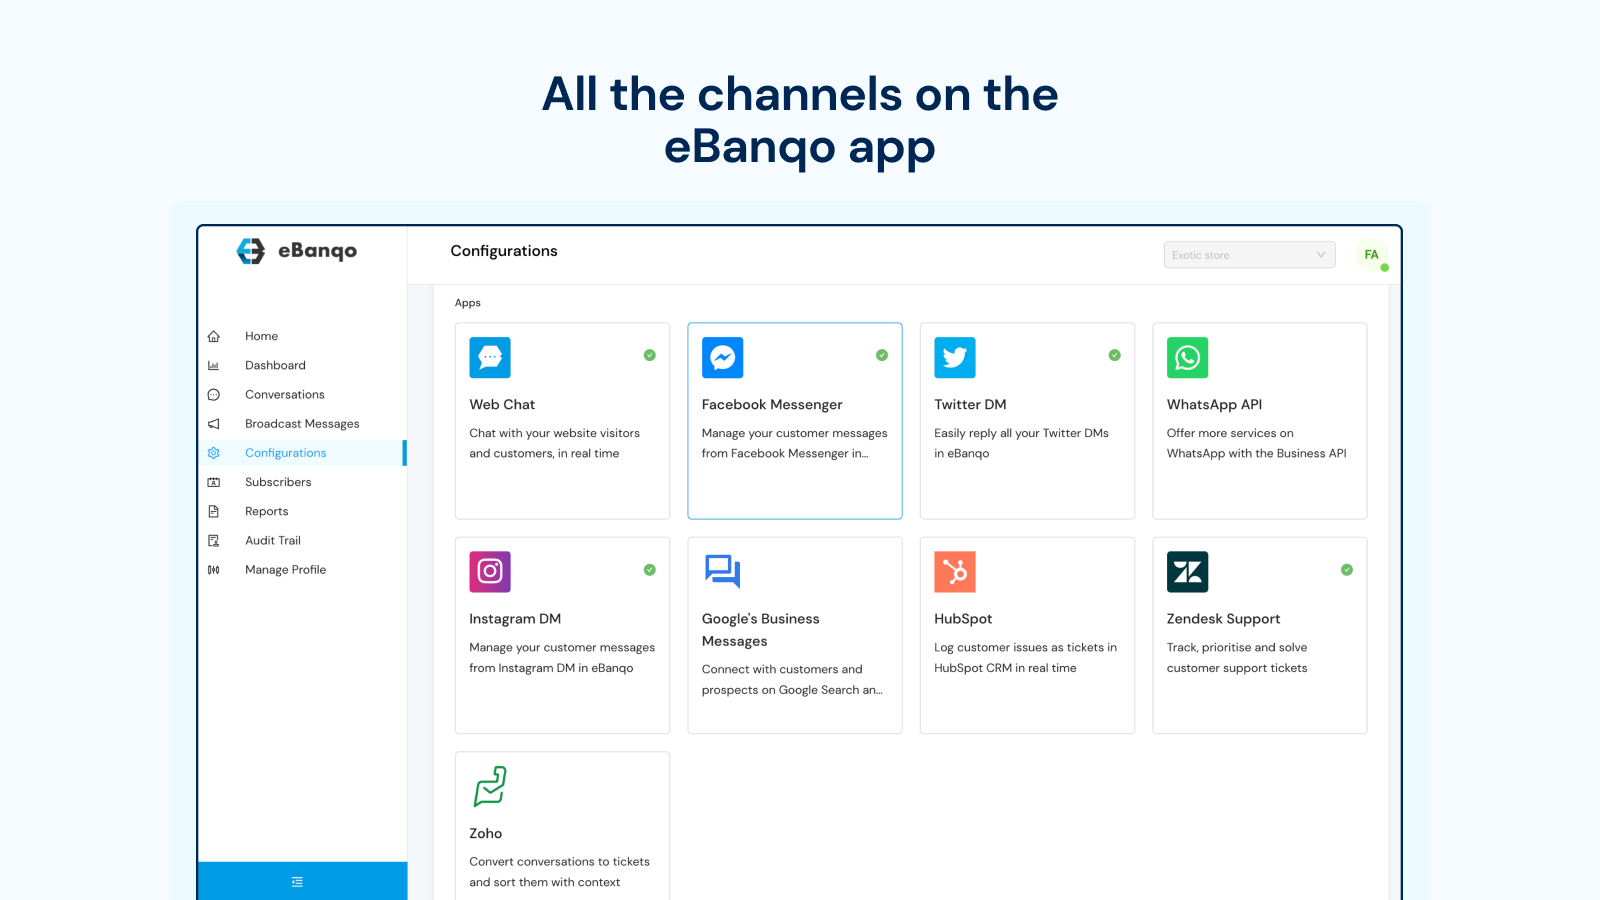 All the channels on the eBanqo app